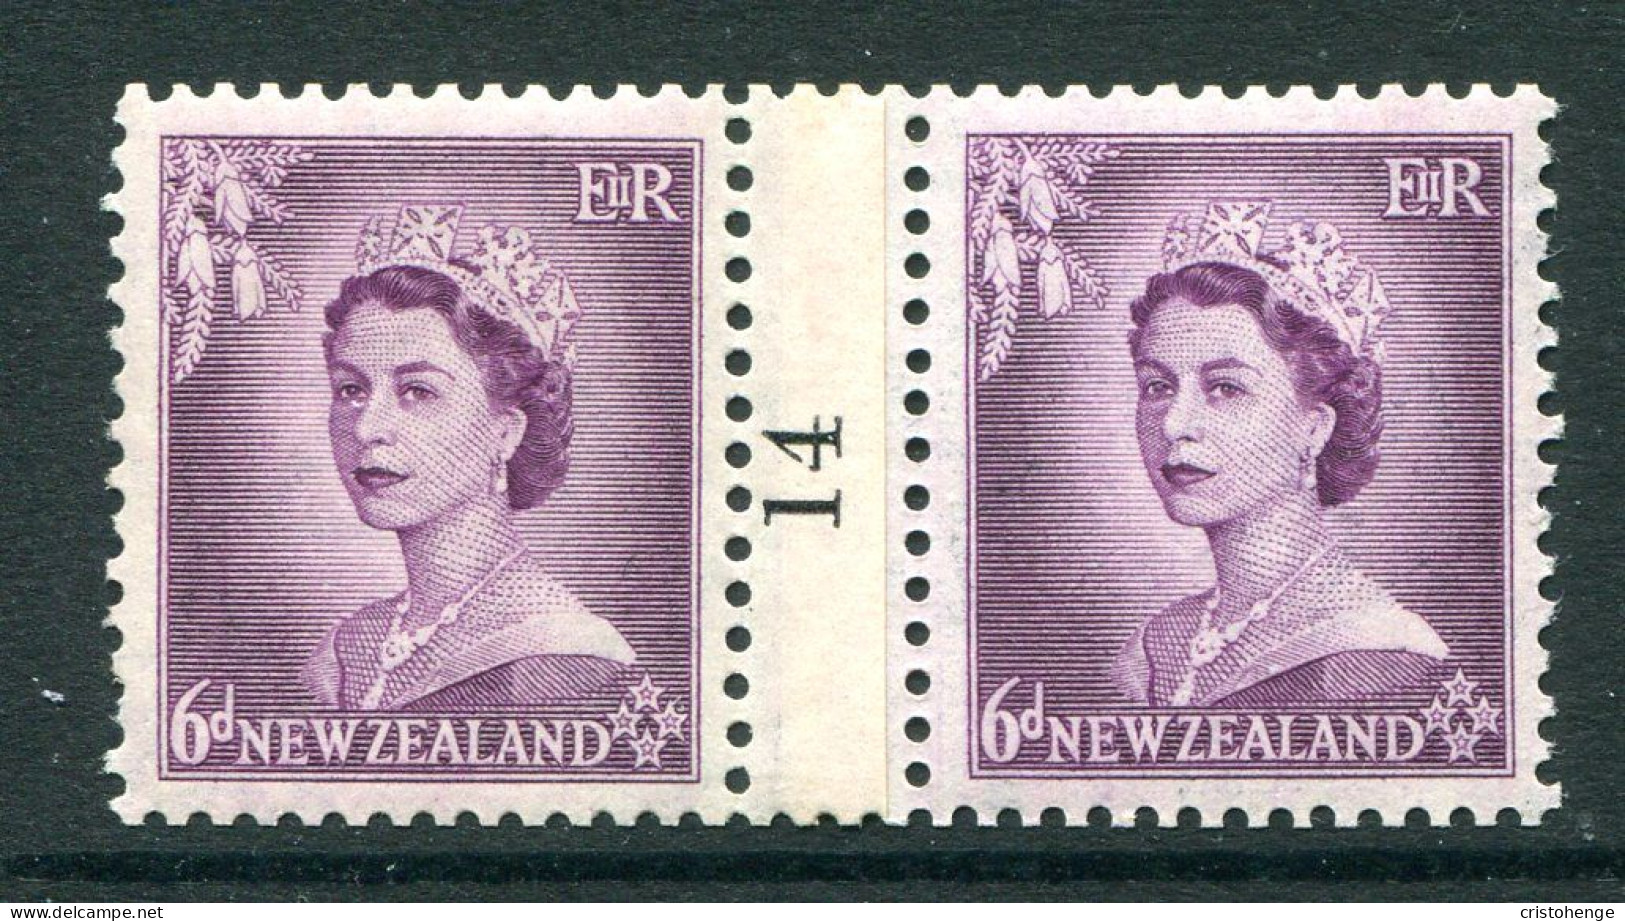 New Zealand 1953-59 QEII Definitives - Coil Pairs - 6d Purple - No. 14 - LHM (SG Unlisted) - Ungebraucht